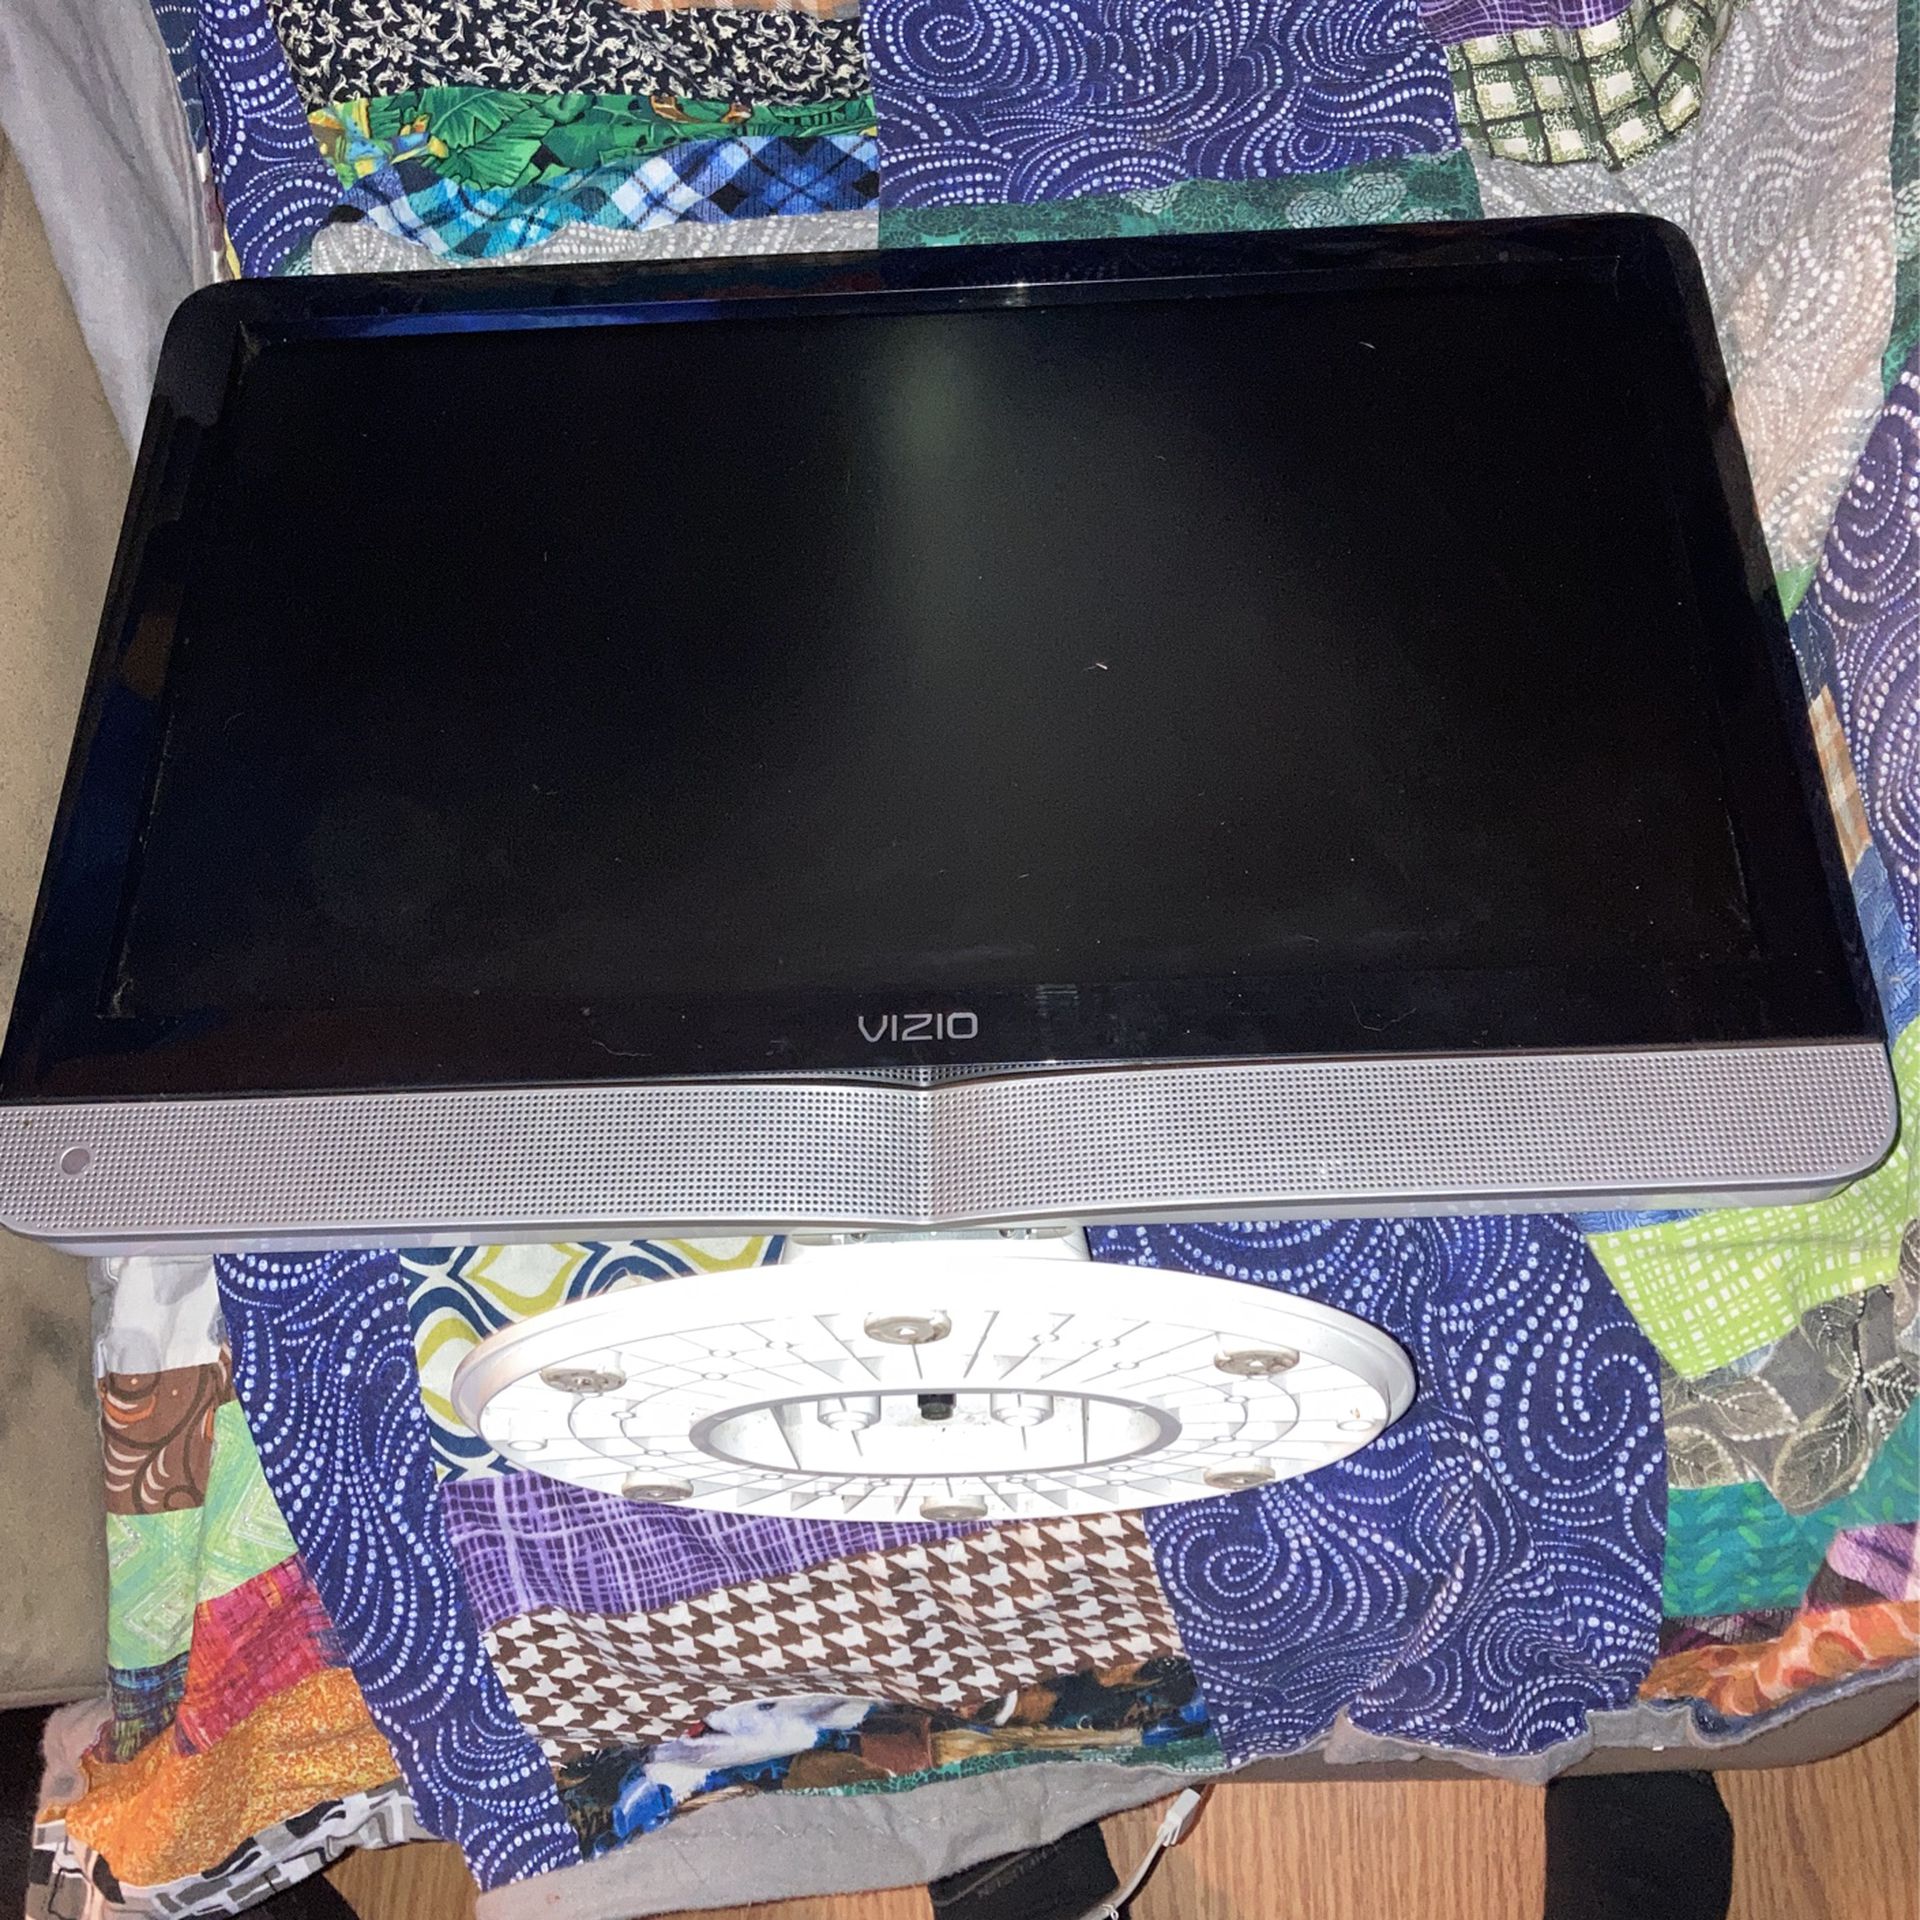 Vizio Monitor With Power Cord And Fully Functionable Please Buy Desperate 